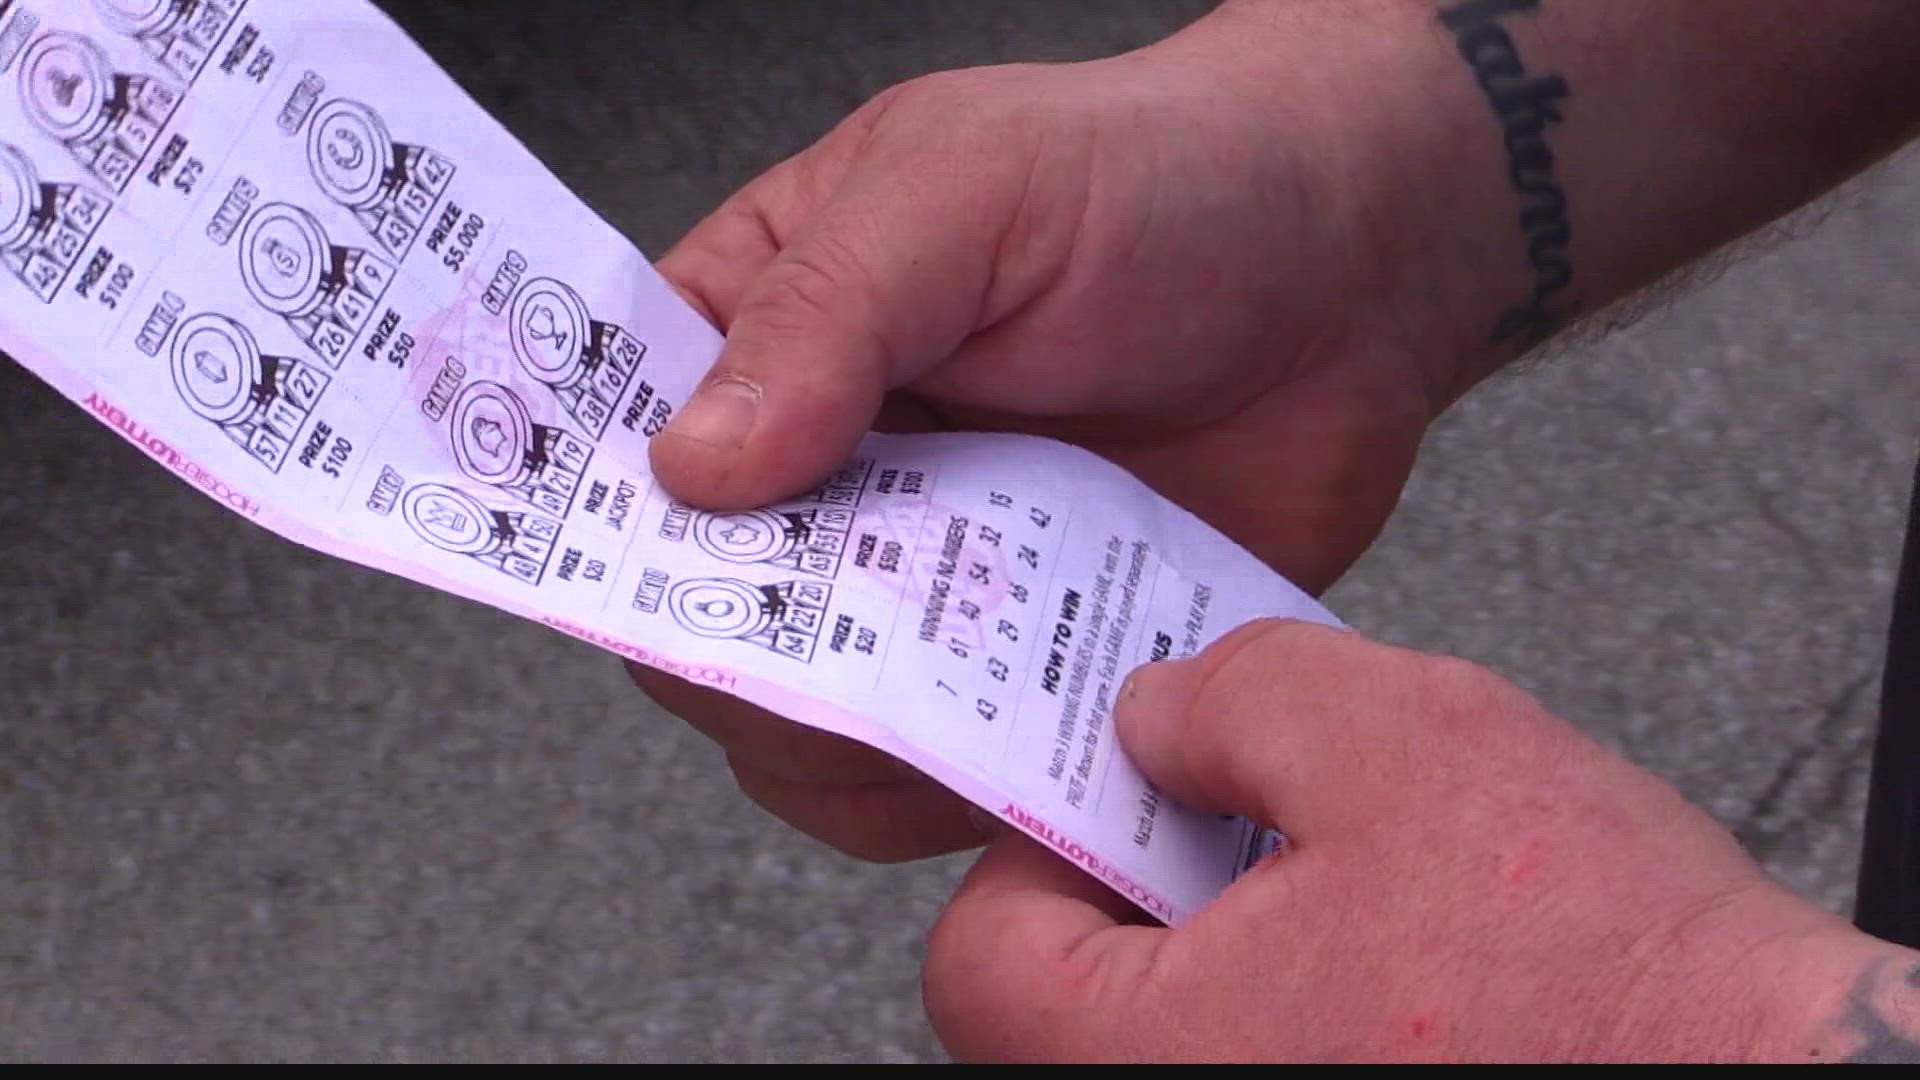 The Hoosier Lottery is investigating after it says several tickets that claimed to be winning ones were actually faulty.